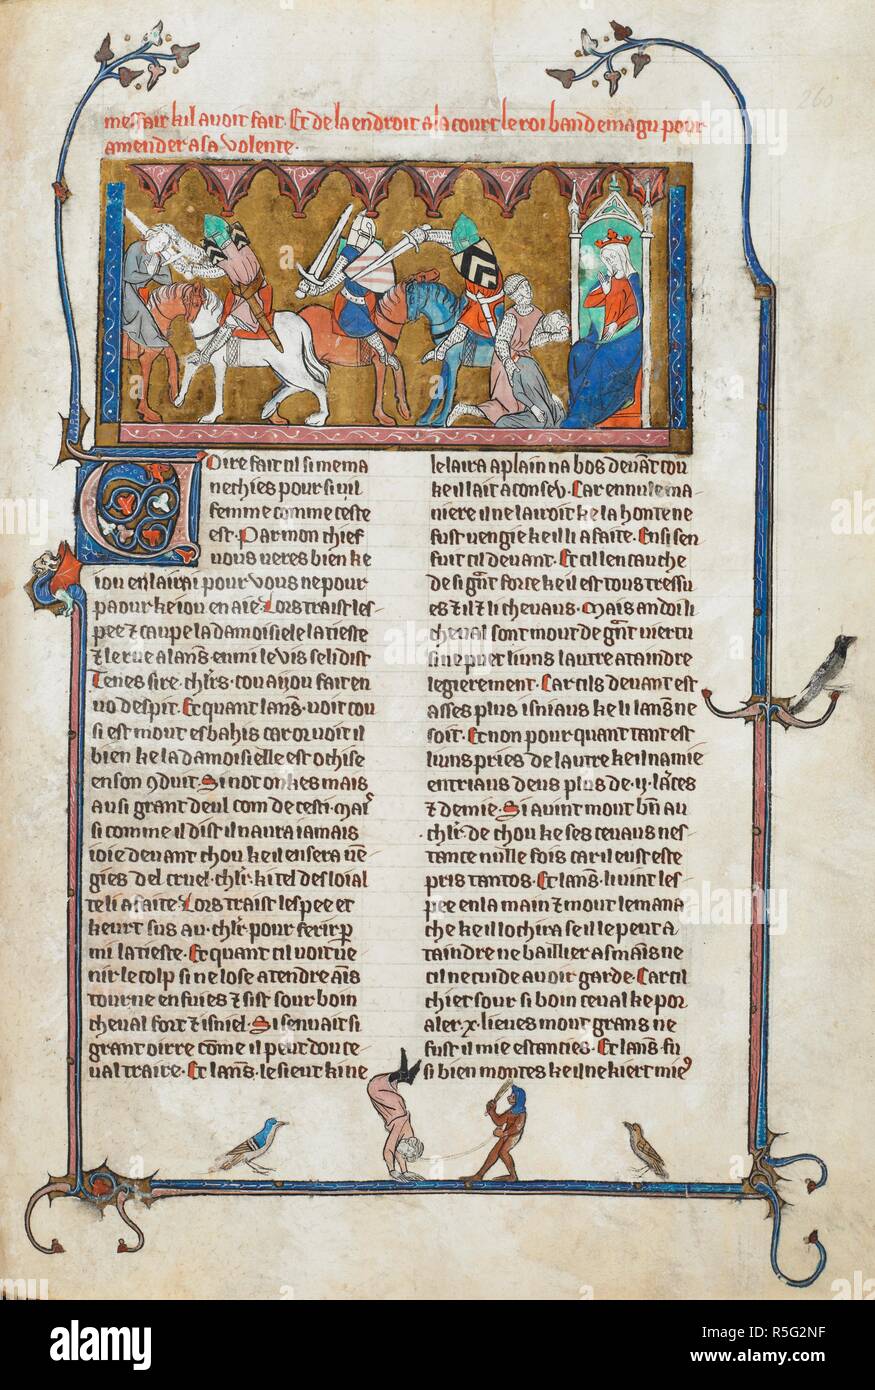 Miniature of a knight cutting off a woman's head, Lancelot fighting the knight, and the knight keeling before Guinevere and showing the woman's head and body, with an illuminated initial 'v'(oire) and a partial bar border containing an ape with whip and chain making a man dance, in the lower margin. Lancelot du Lac. France?; begining of 14th century. Source: Royal 20 D. IV, f.260. Language: French. Stock Photo